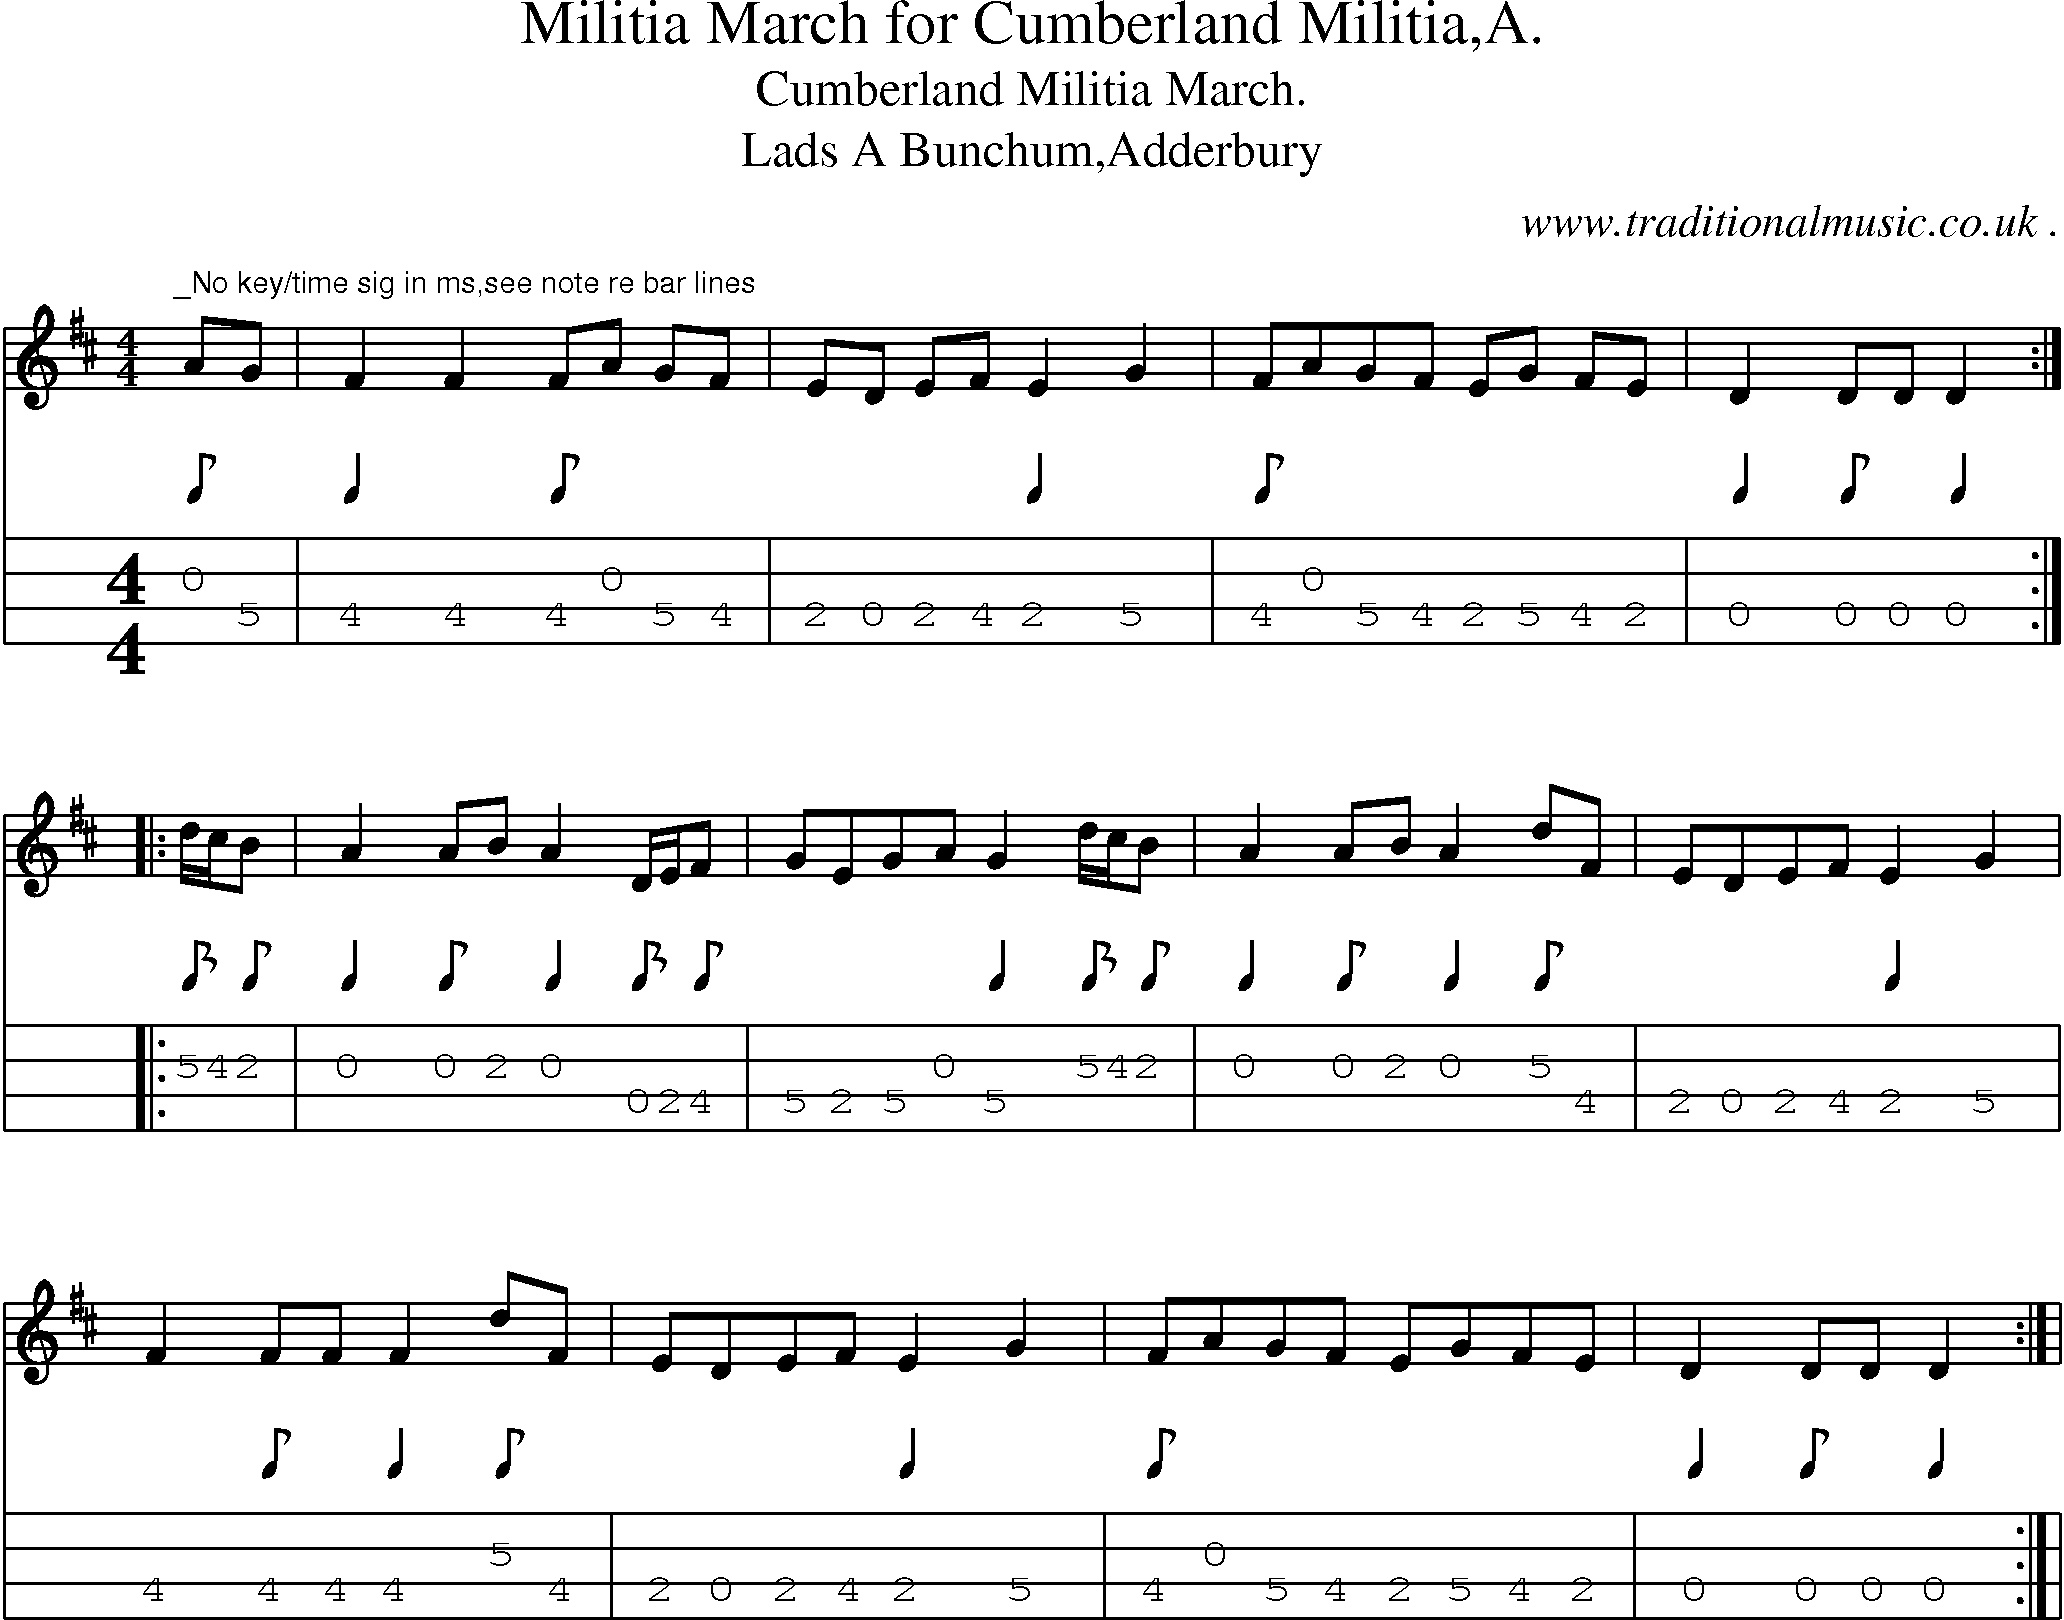 Sheet-Music and Mandolin Tabs for Militia March For Cumberland Militiaa